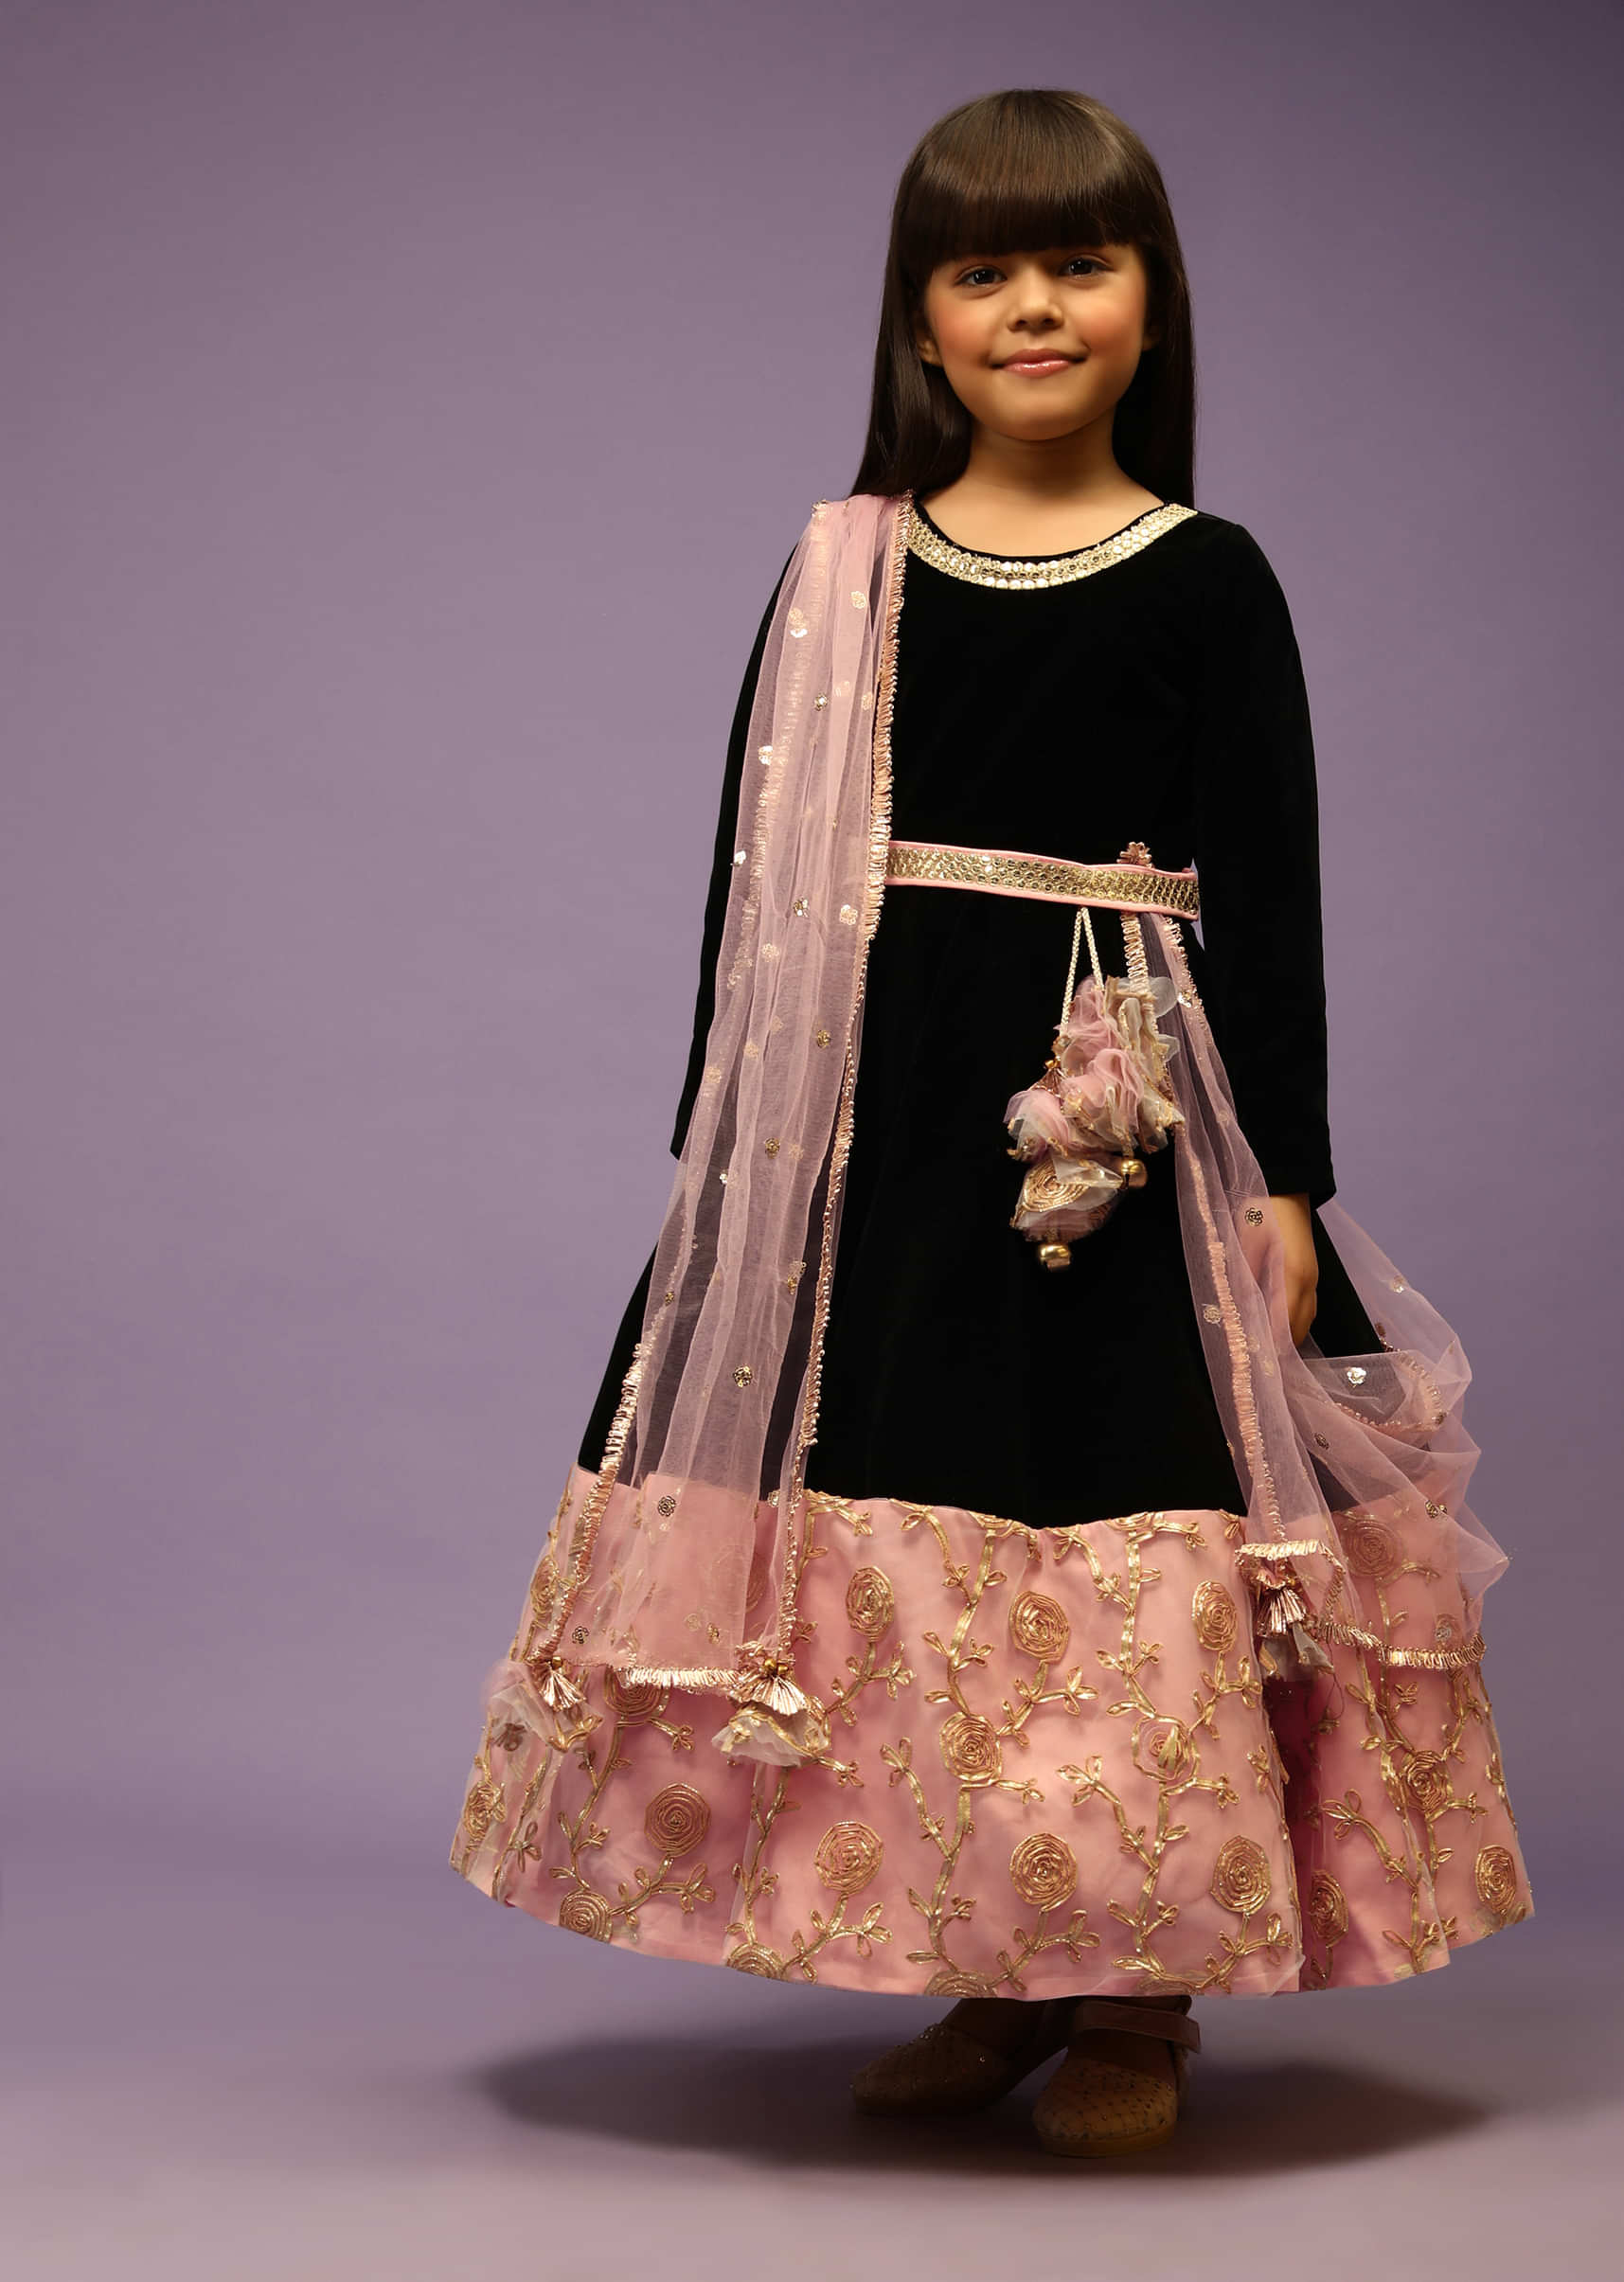 Kalki Girls Black Anarkali gown with pink border and intricate lace embroidery by fayon kids